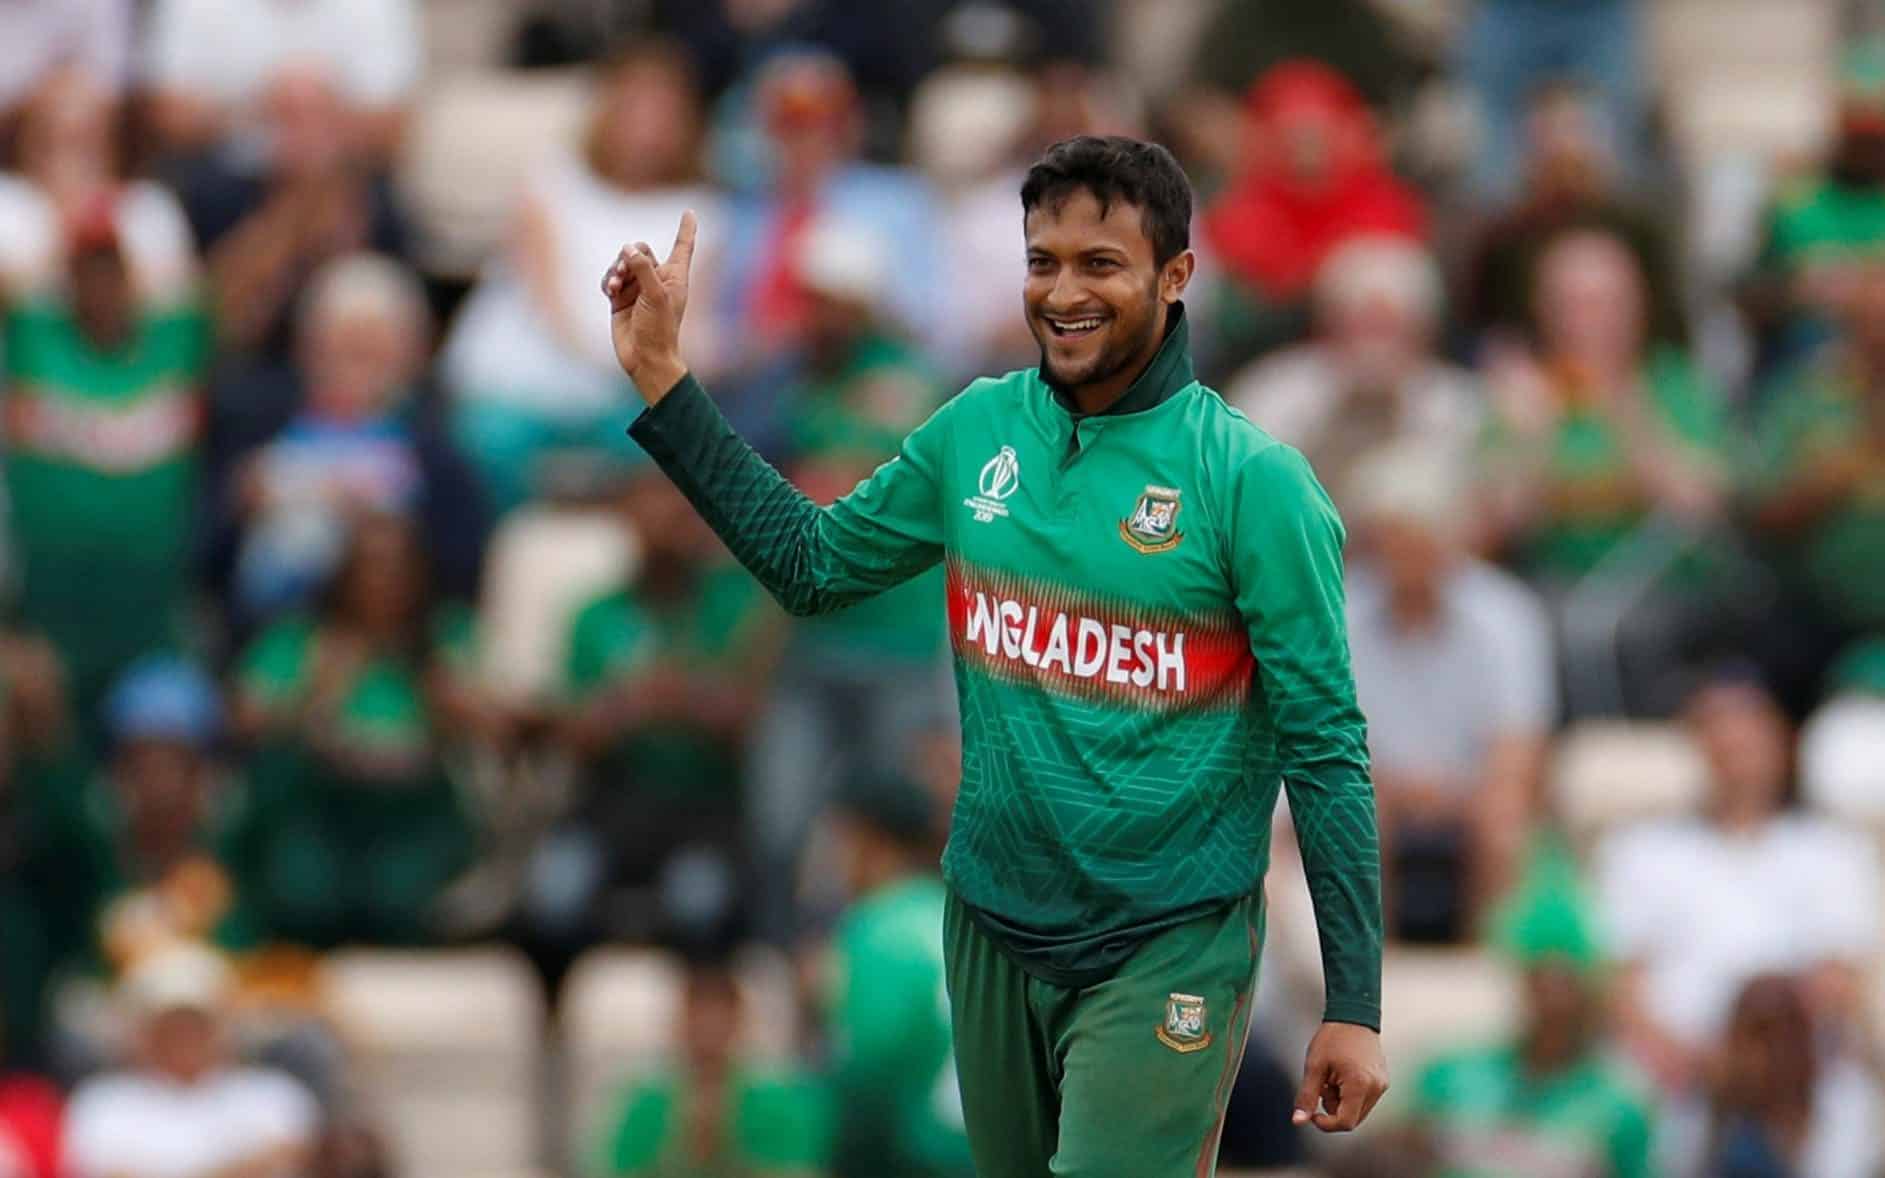 Shakib is second richest among captains, Rohit is number one